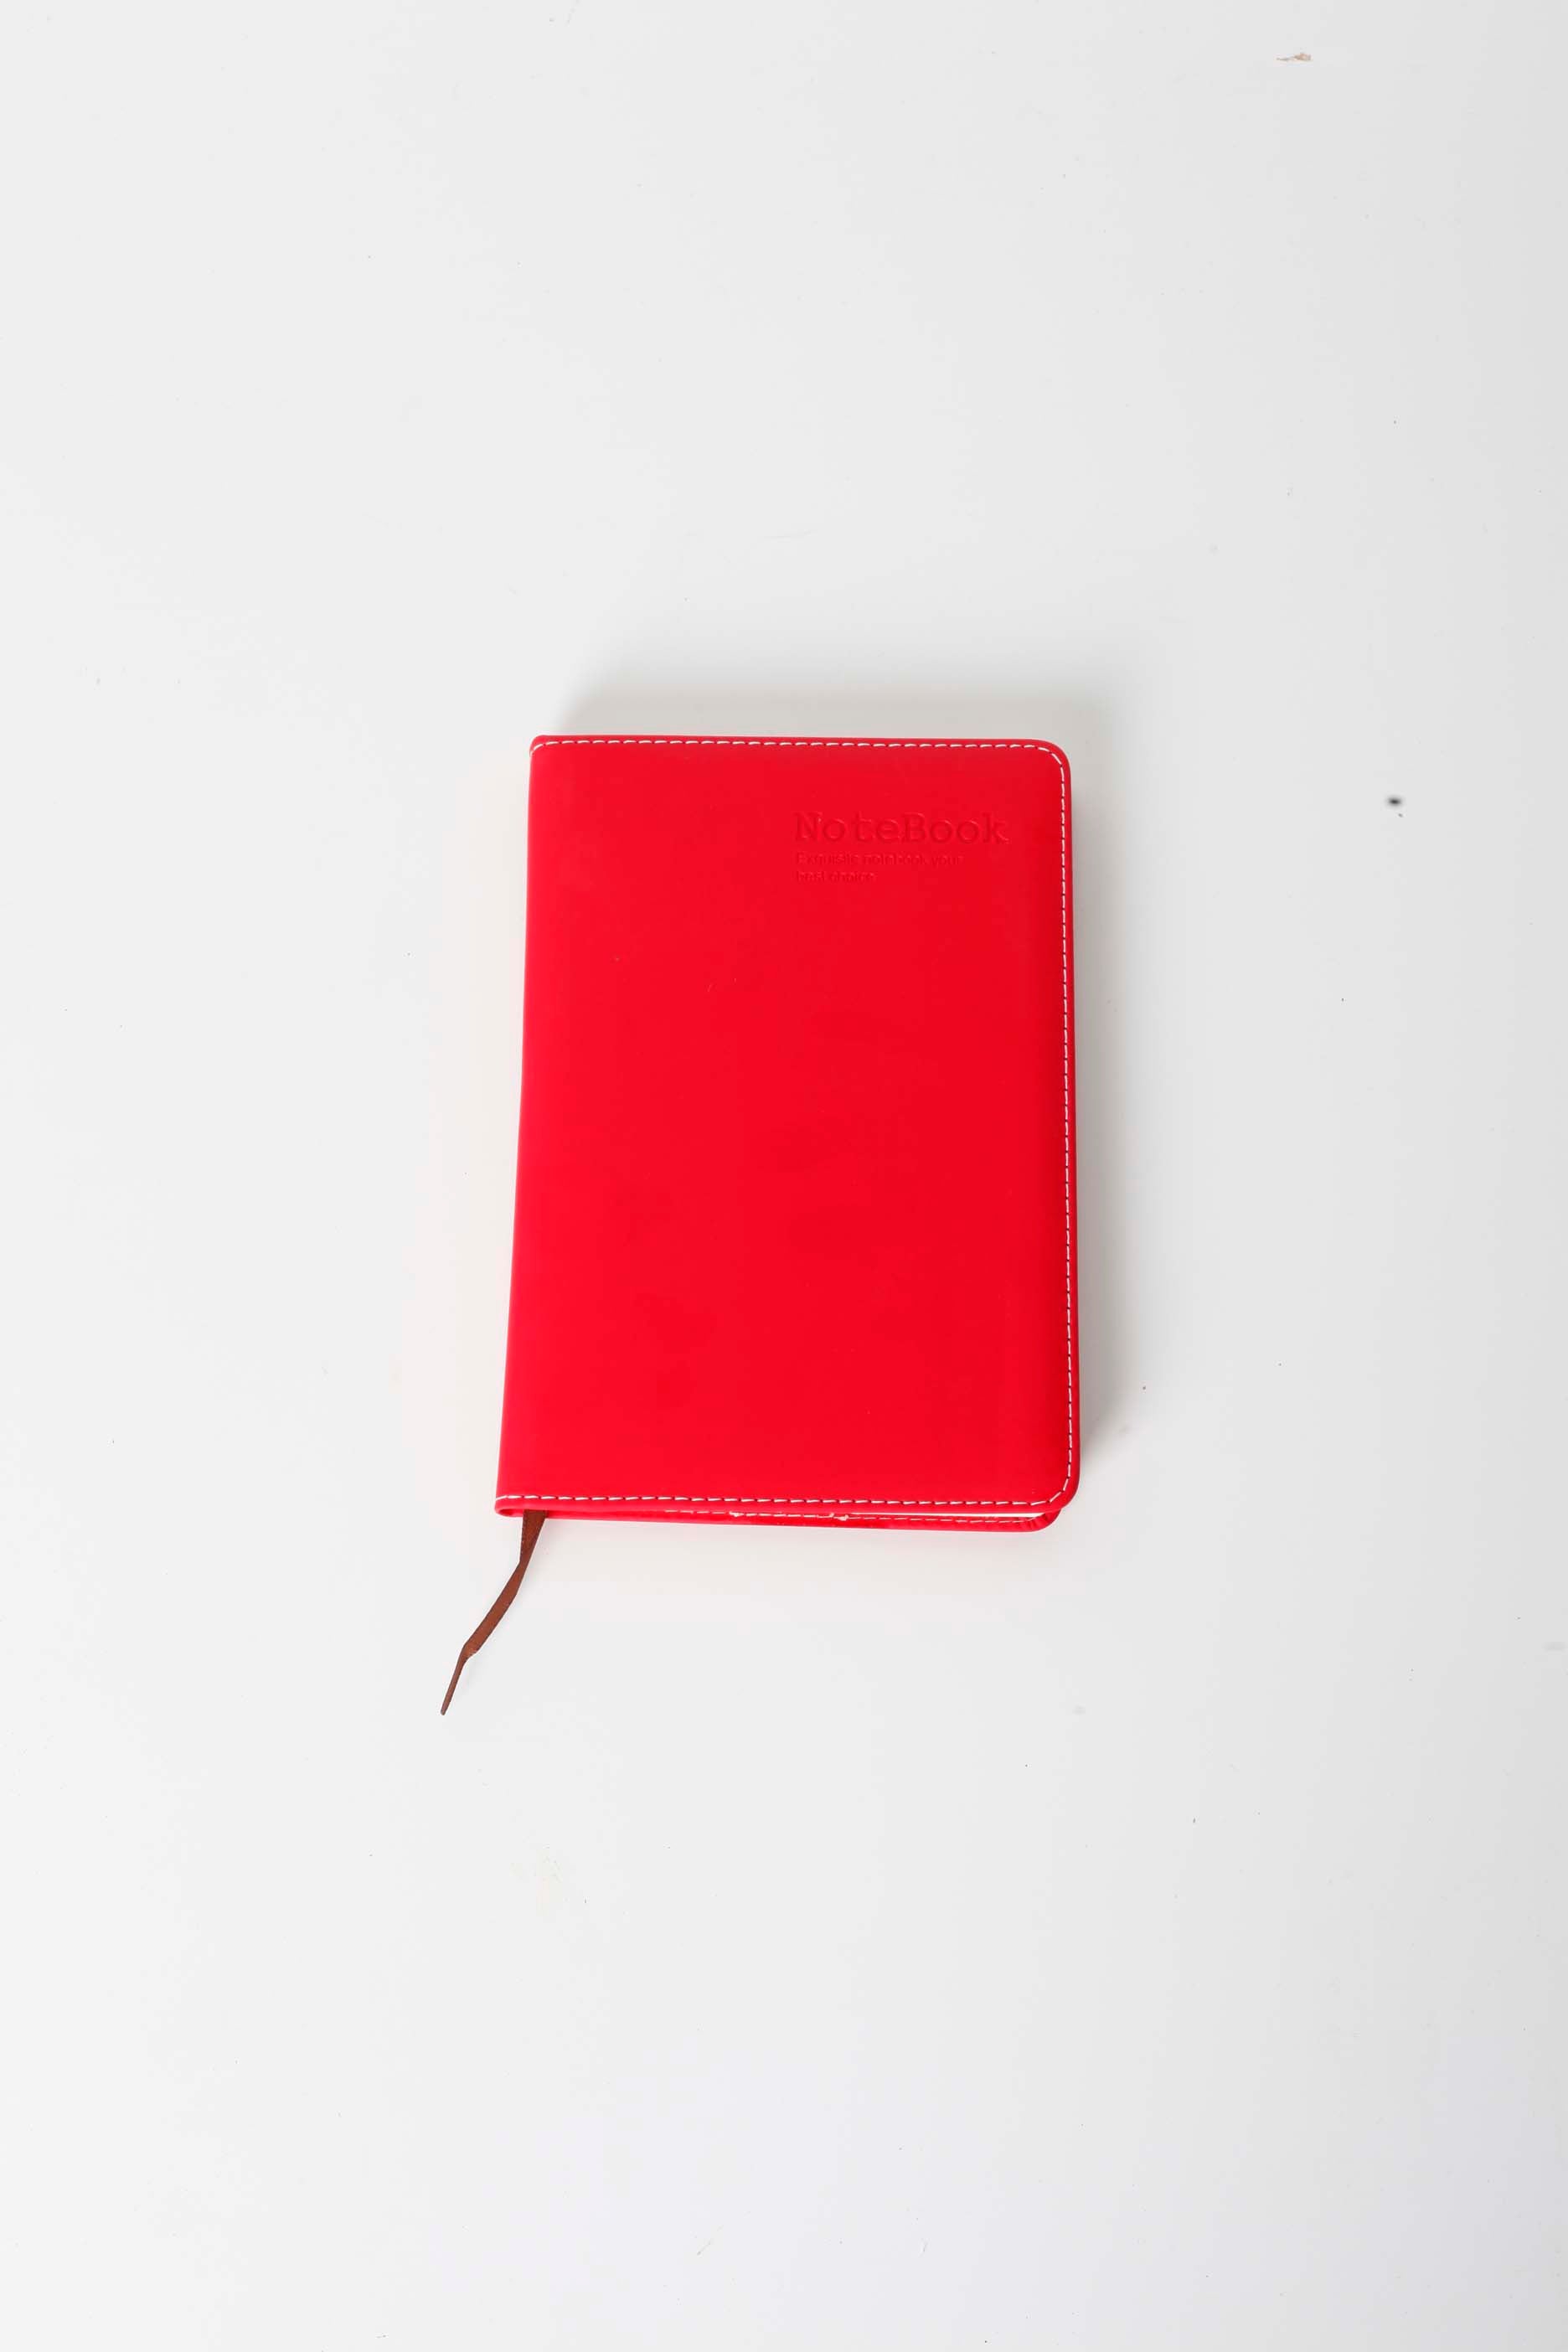 Red Leather-bound Notebook